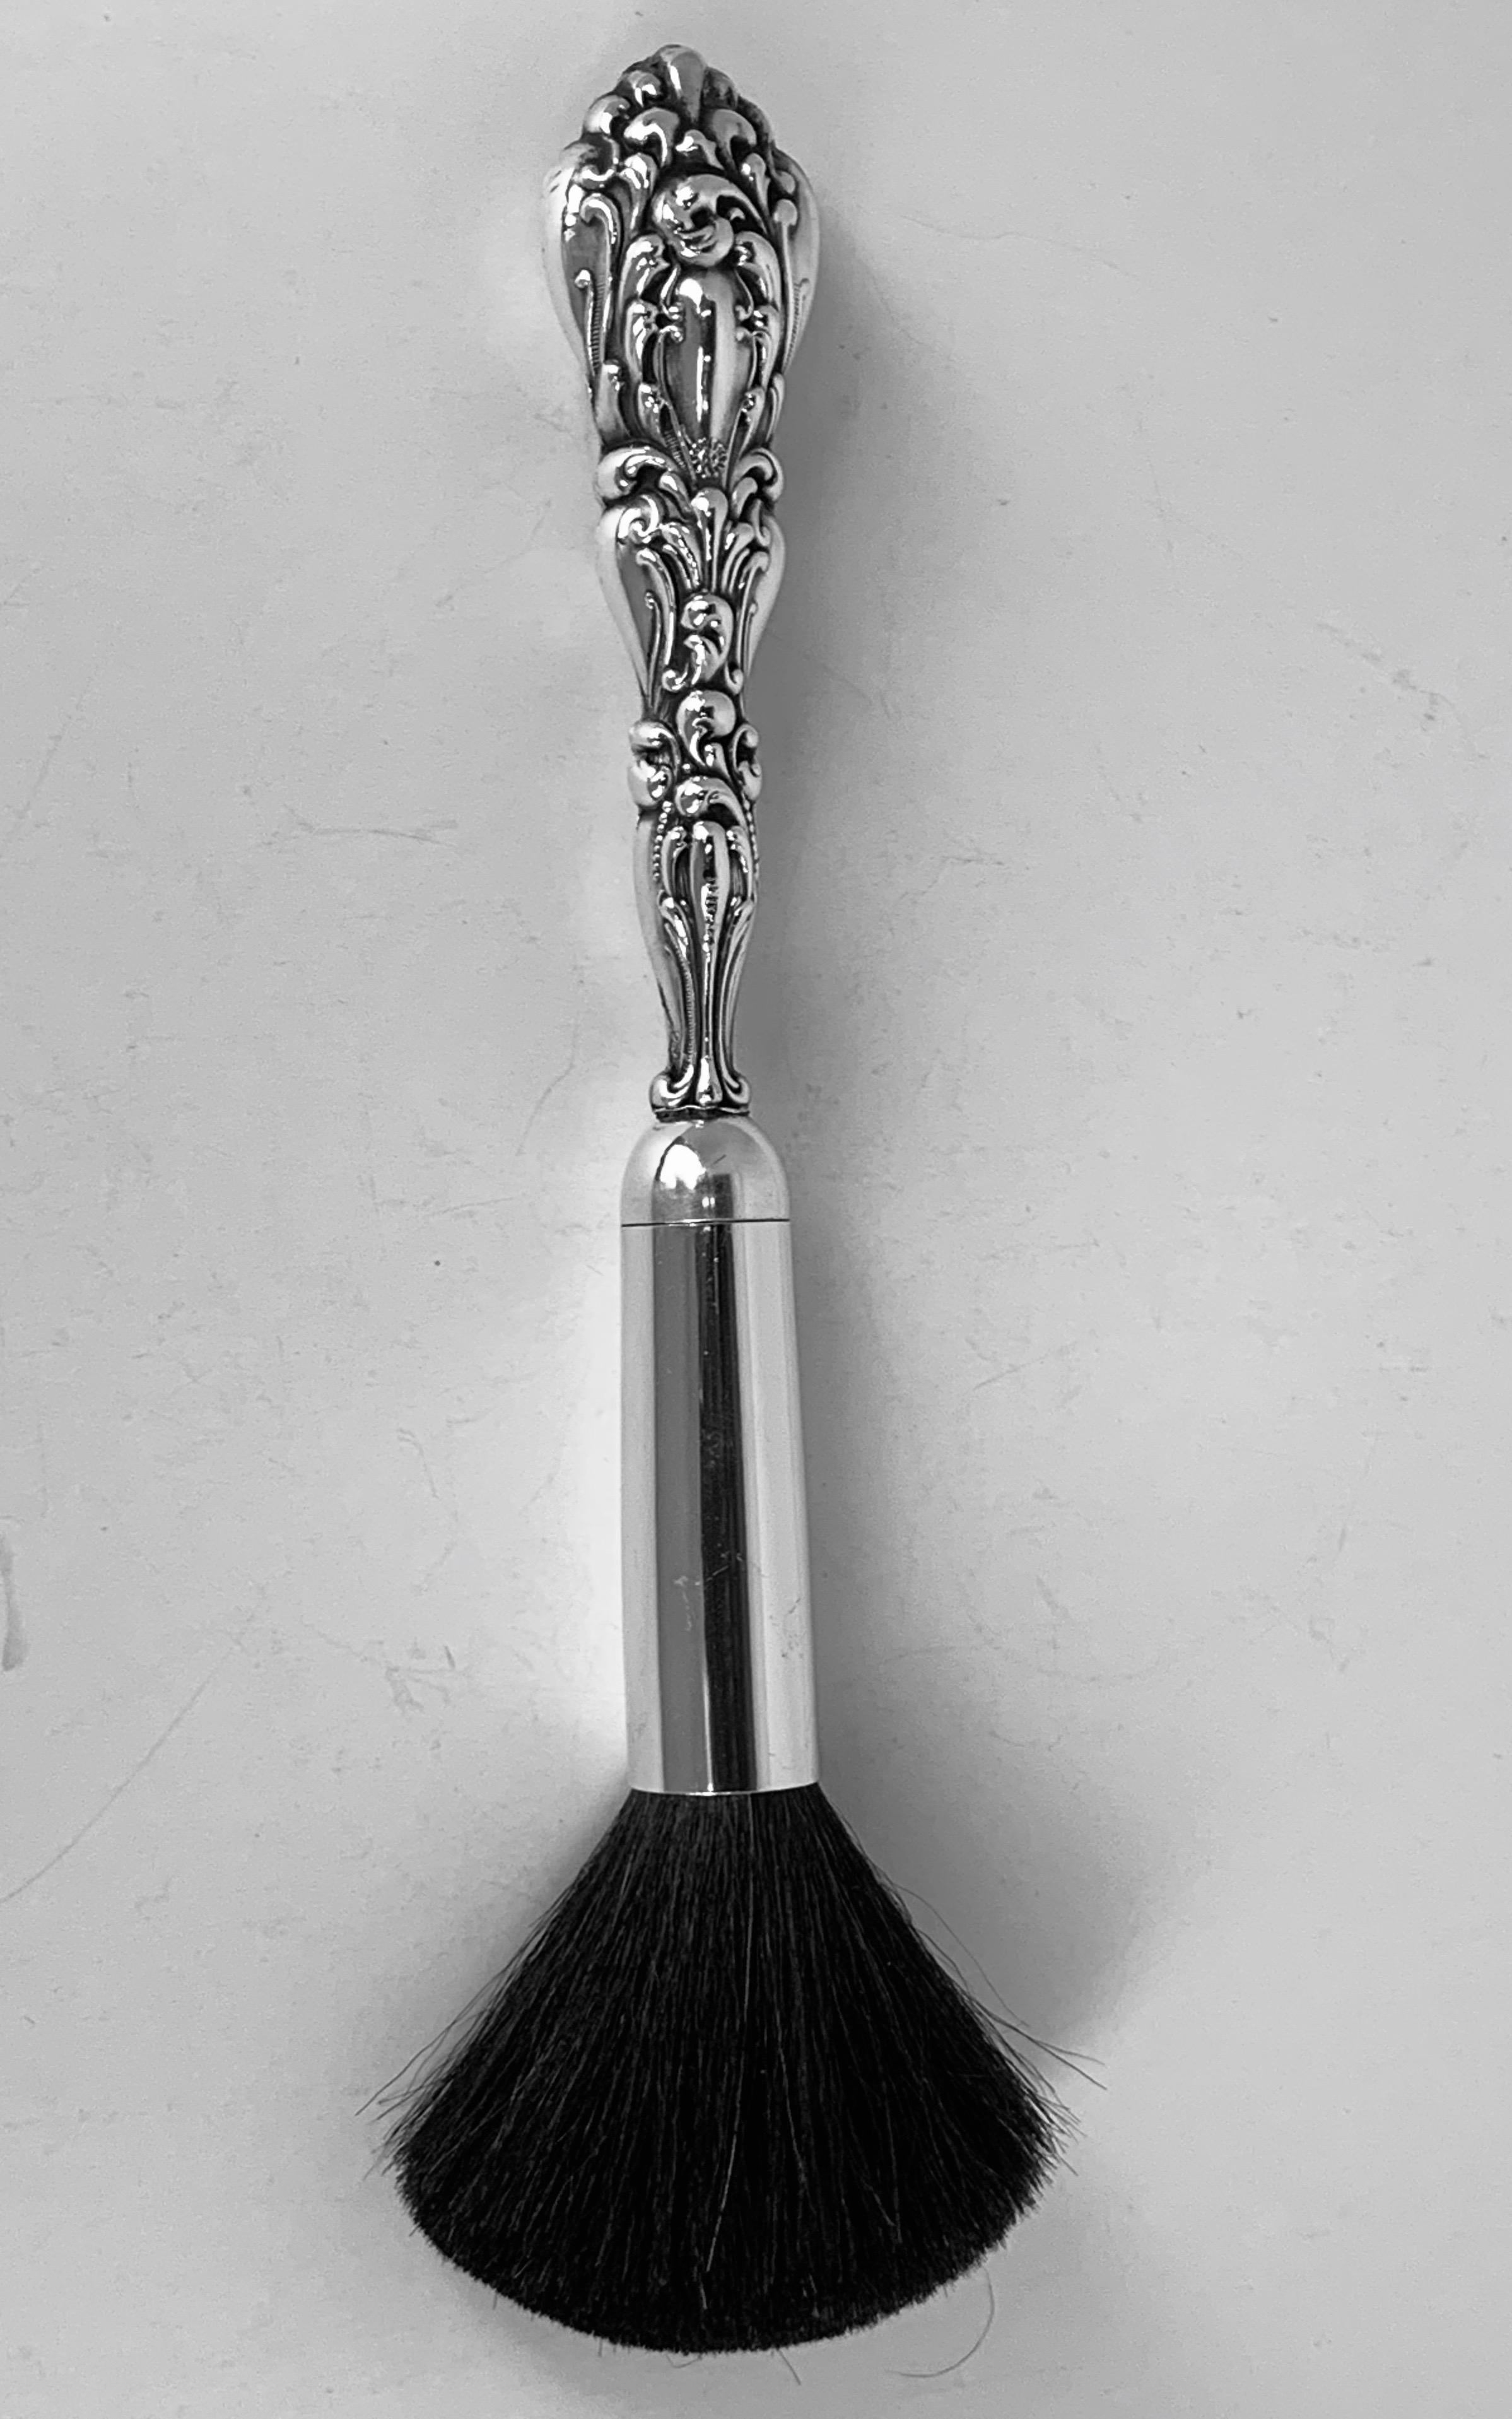 Hand-Crafted Make-Up Brush with a Sterling Silver Repoussé Hande,  American, 19th c. 